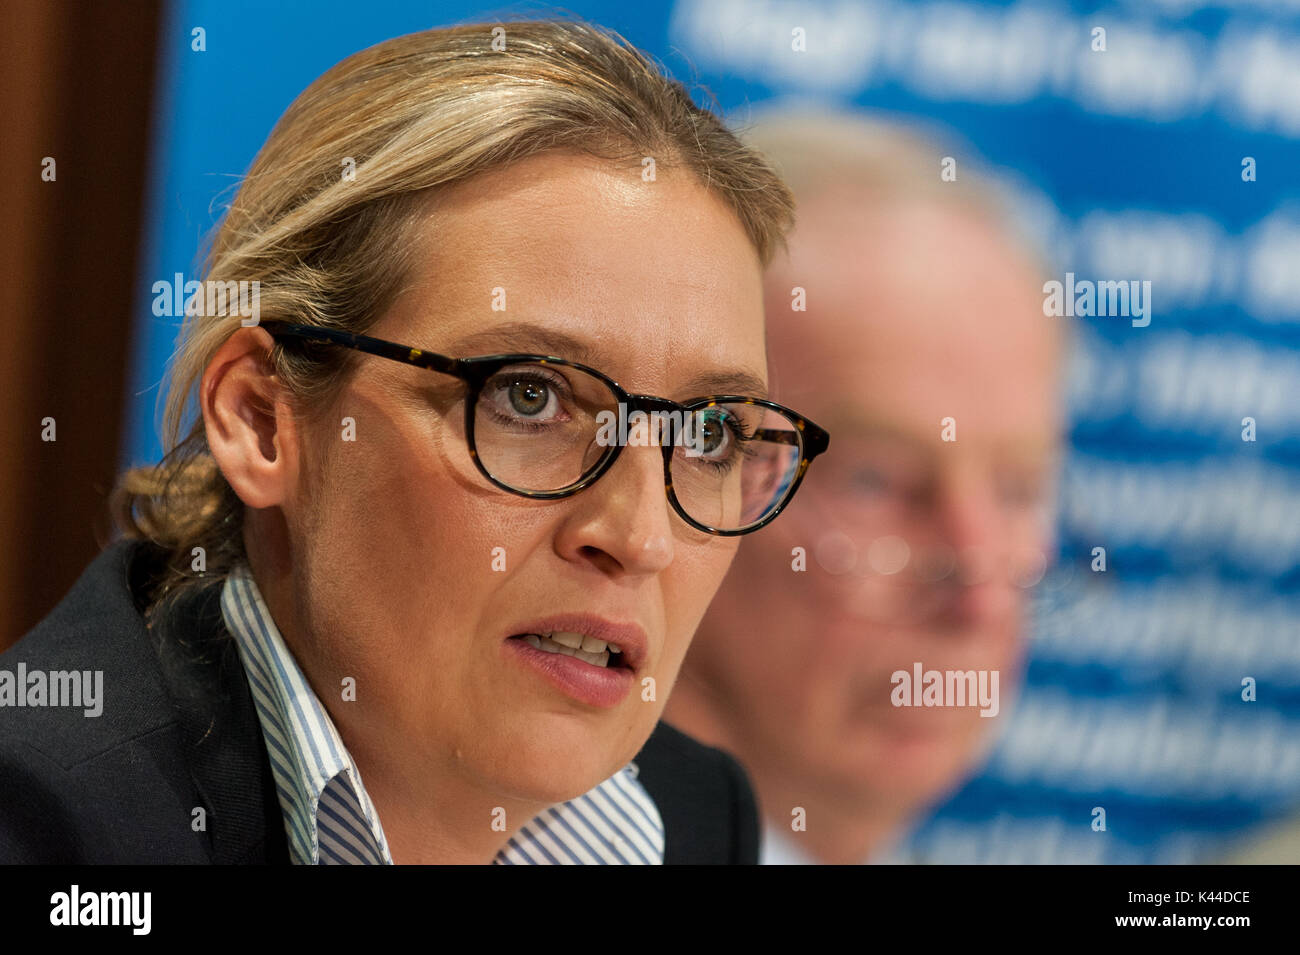 The top candidate of the AfD Alice Weidel speaks during the press conference. The AfD (alternative for Germany) will be presenting its concept for the power generation and diesel engines at the press conference entitled 'Ending Irrigation - Protecting the Environment'. Stock Photo